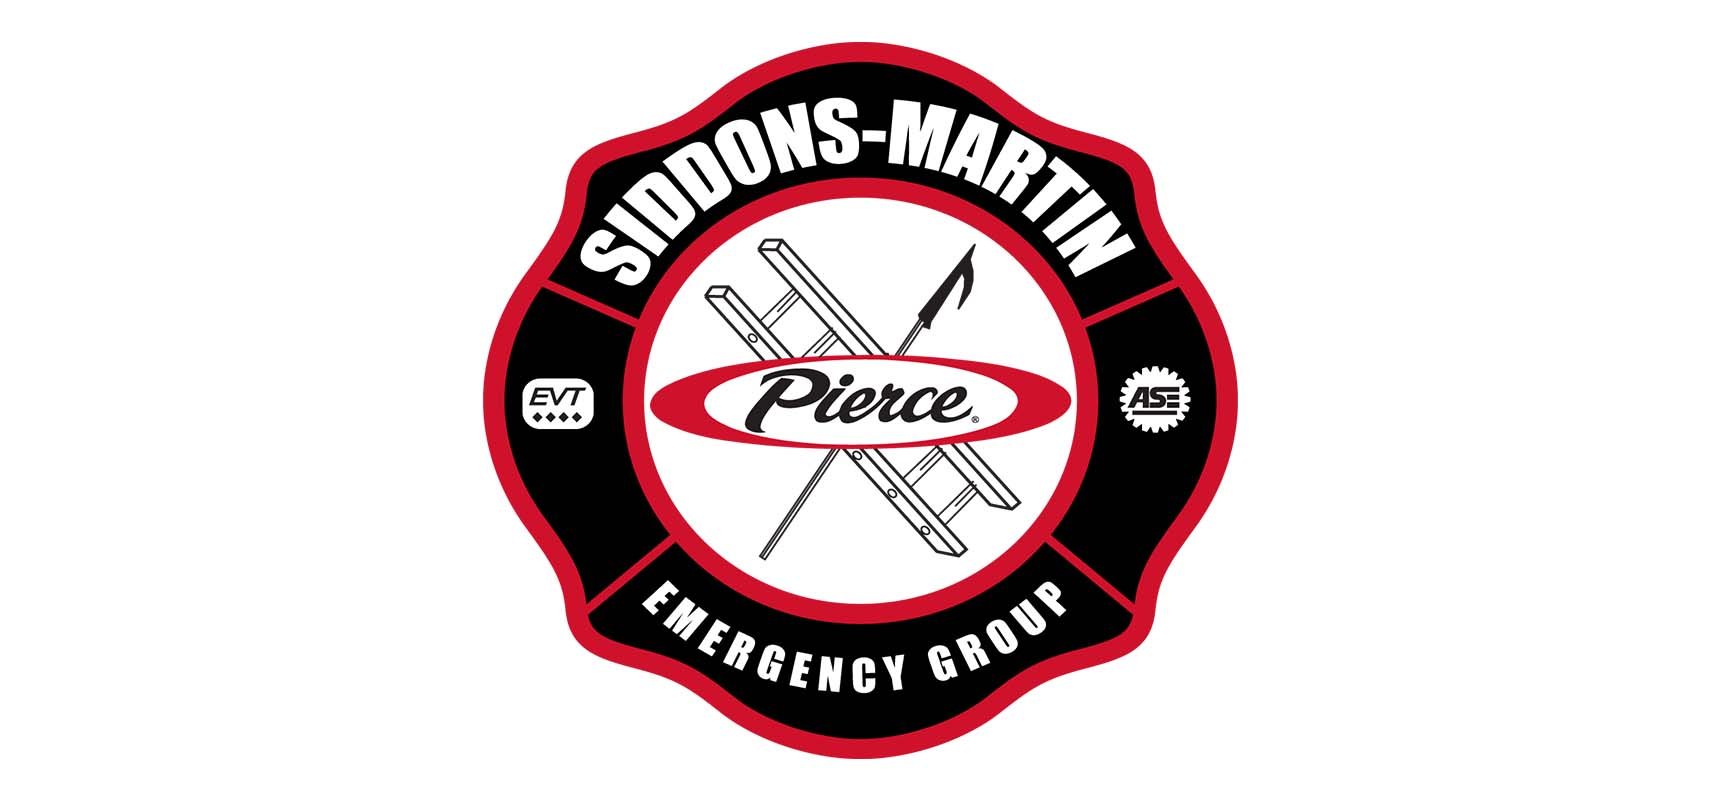 Siddons Martin Emergency Group expands territory with acquisition of Superior Equipment